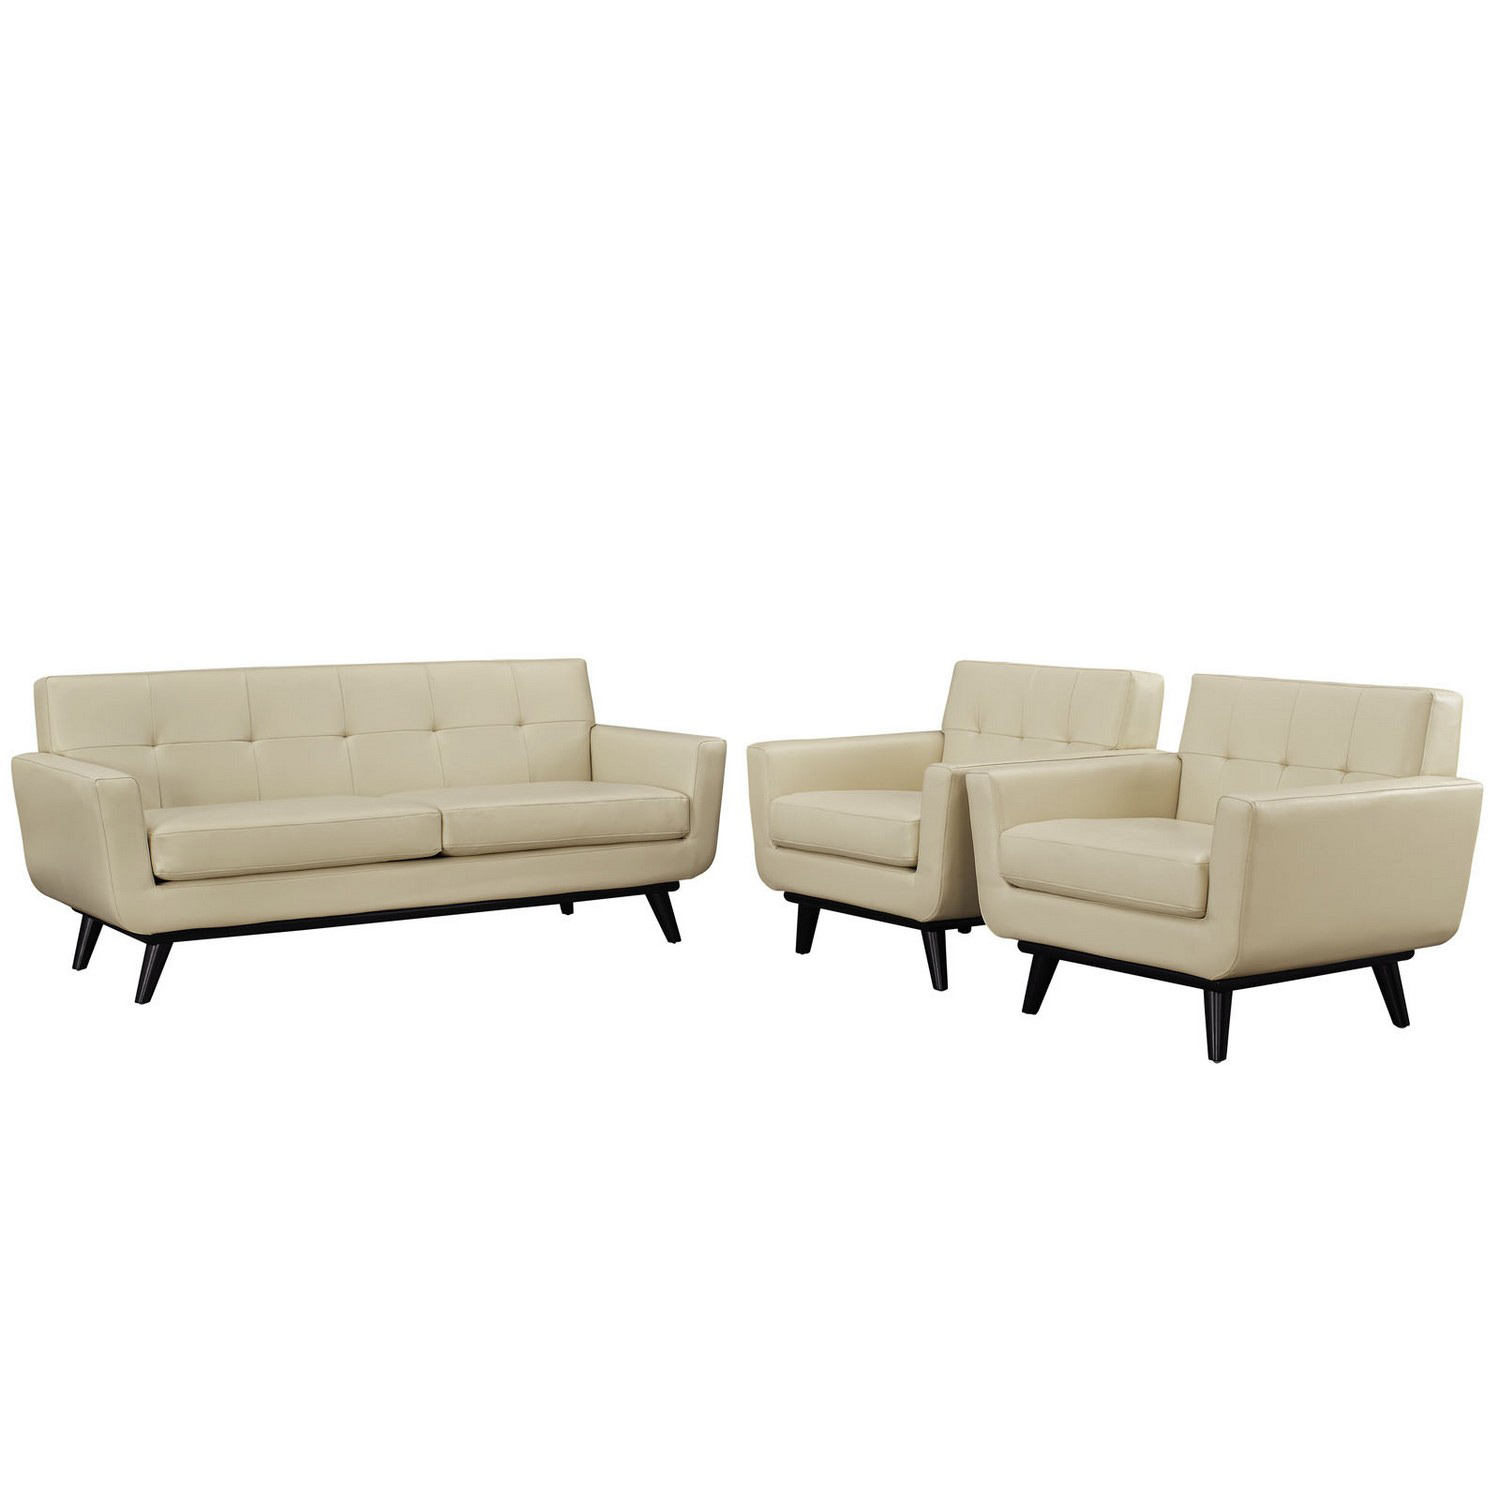 Modway Engage 3 Piece Leather Living Room Set - Beige